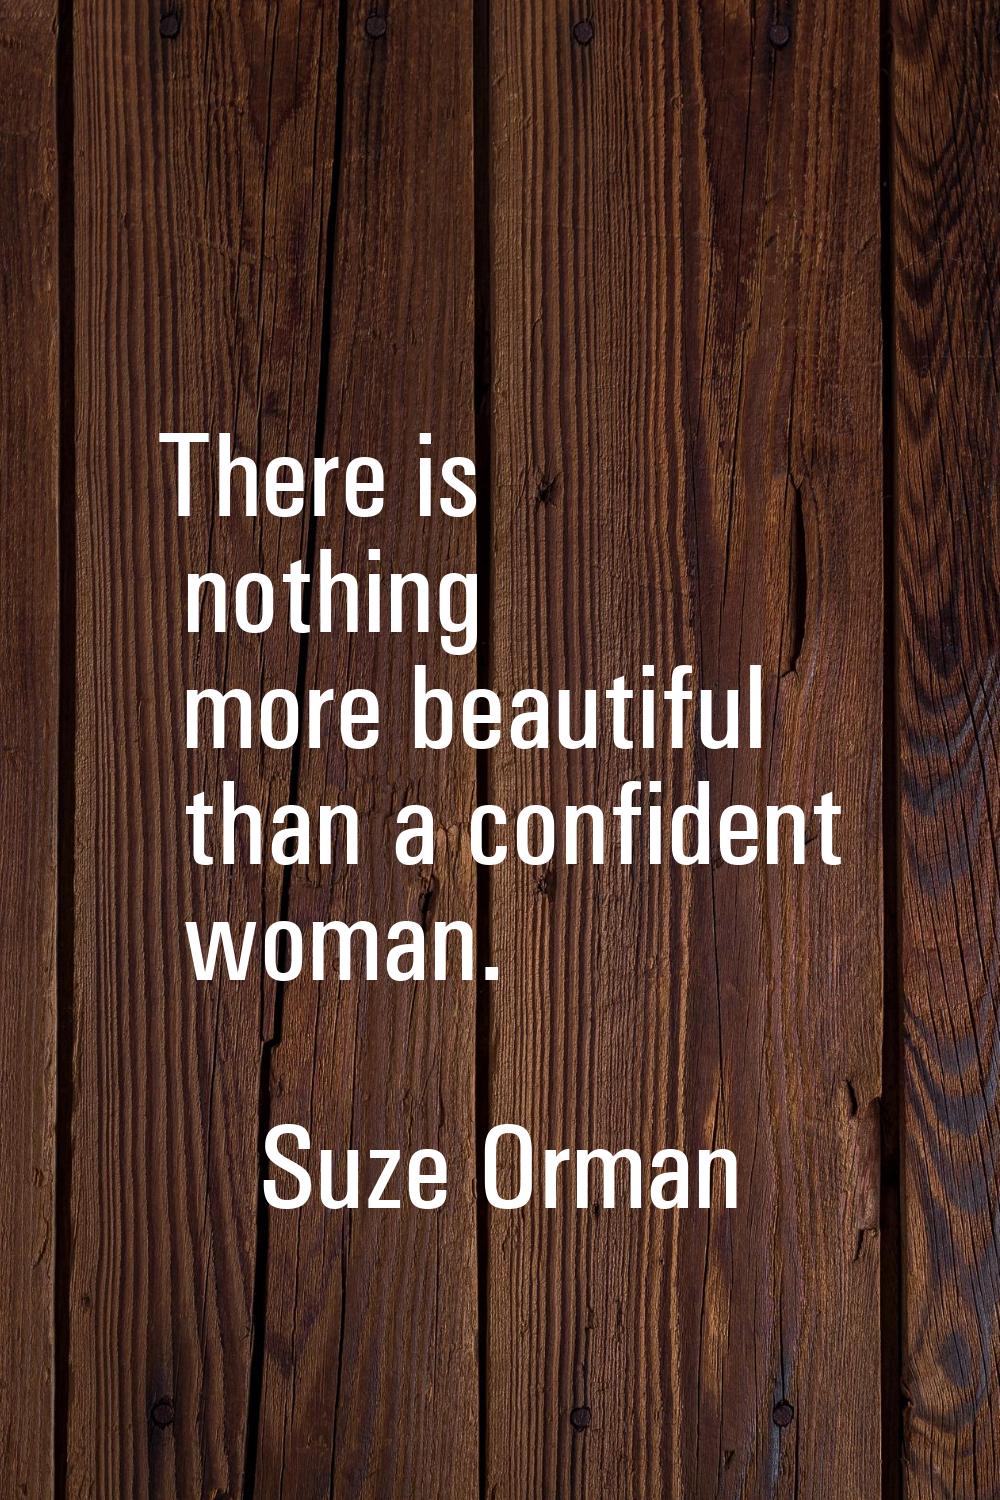 There is nothing more beautiful than a confident woman.